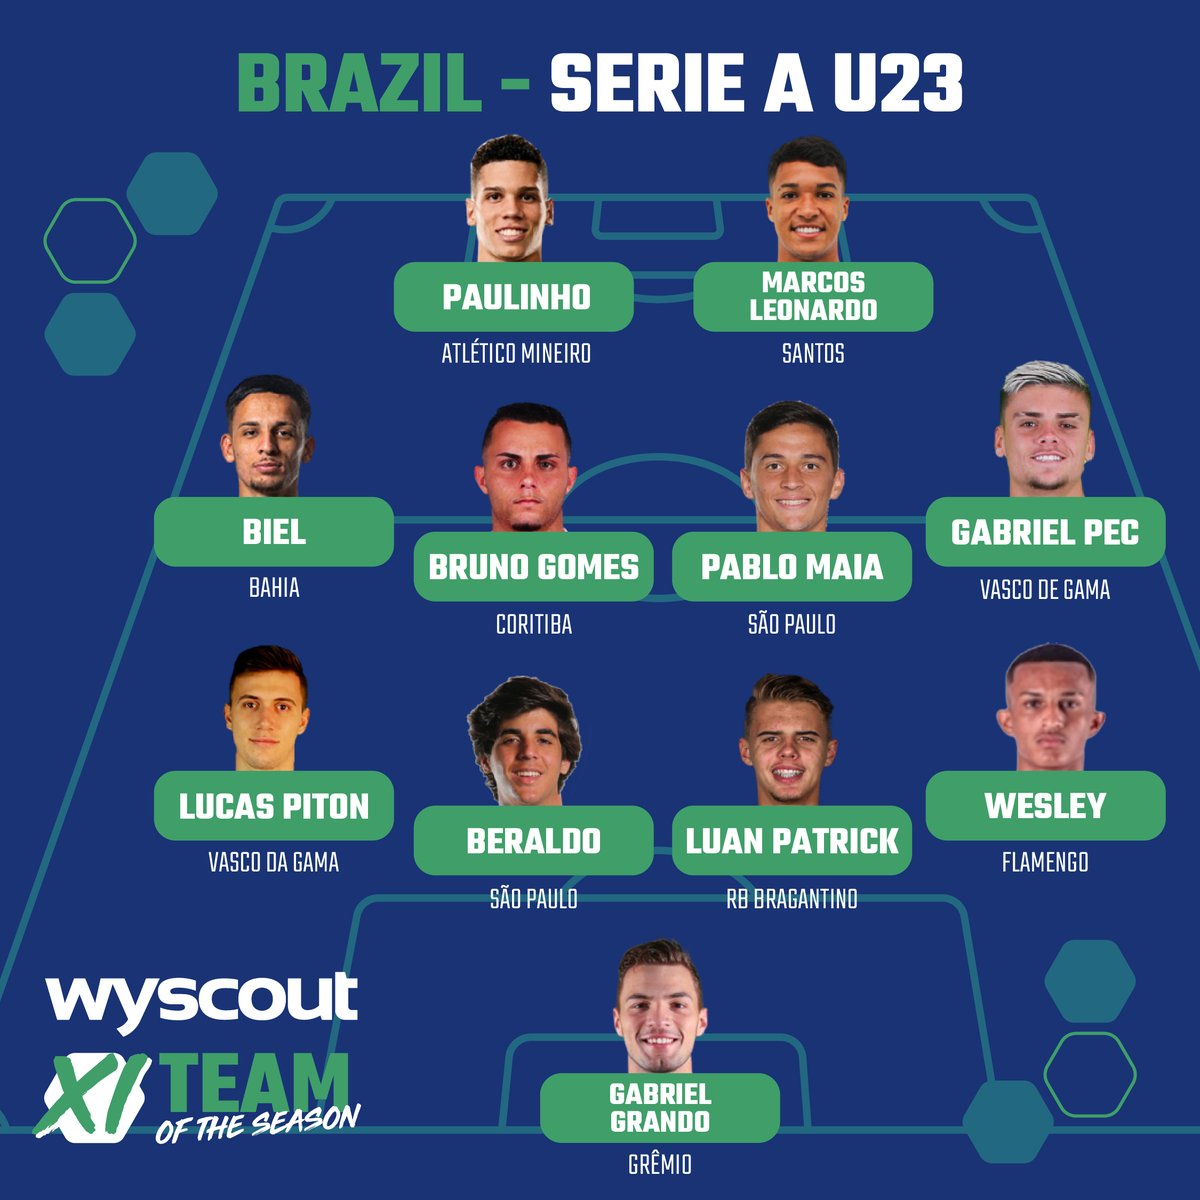 Wyscout Teams of the Season - Brazil Serie A U23 Our @Brasileirao top U23 combined XI is packed with exciting prospects. Learn how the line up is calculated with Wyscout Rankings and see who made the cut 👉 bit.ly/3Rxsgd4